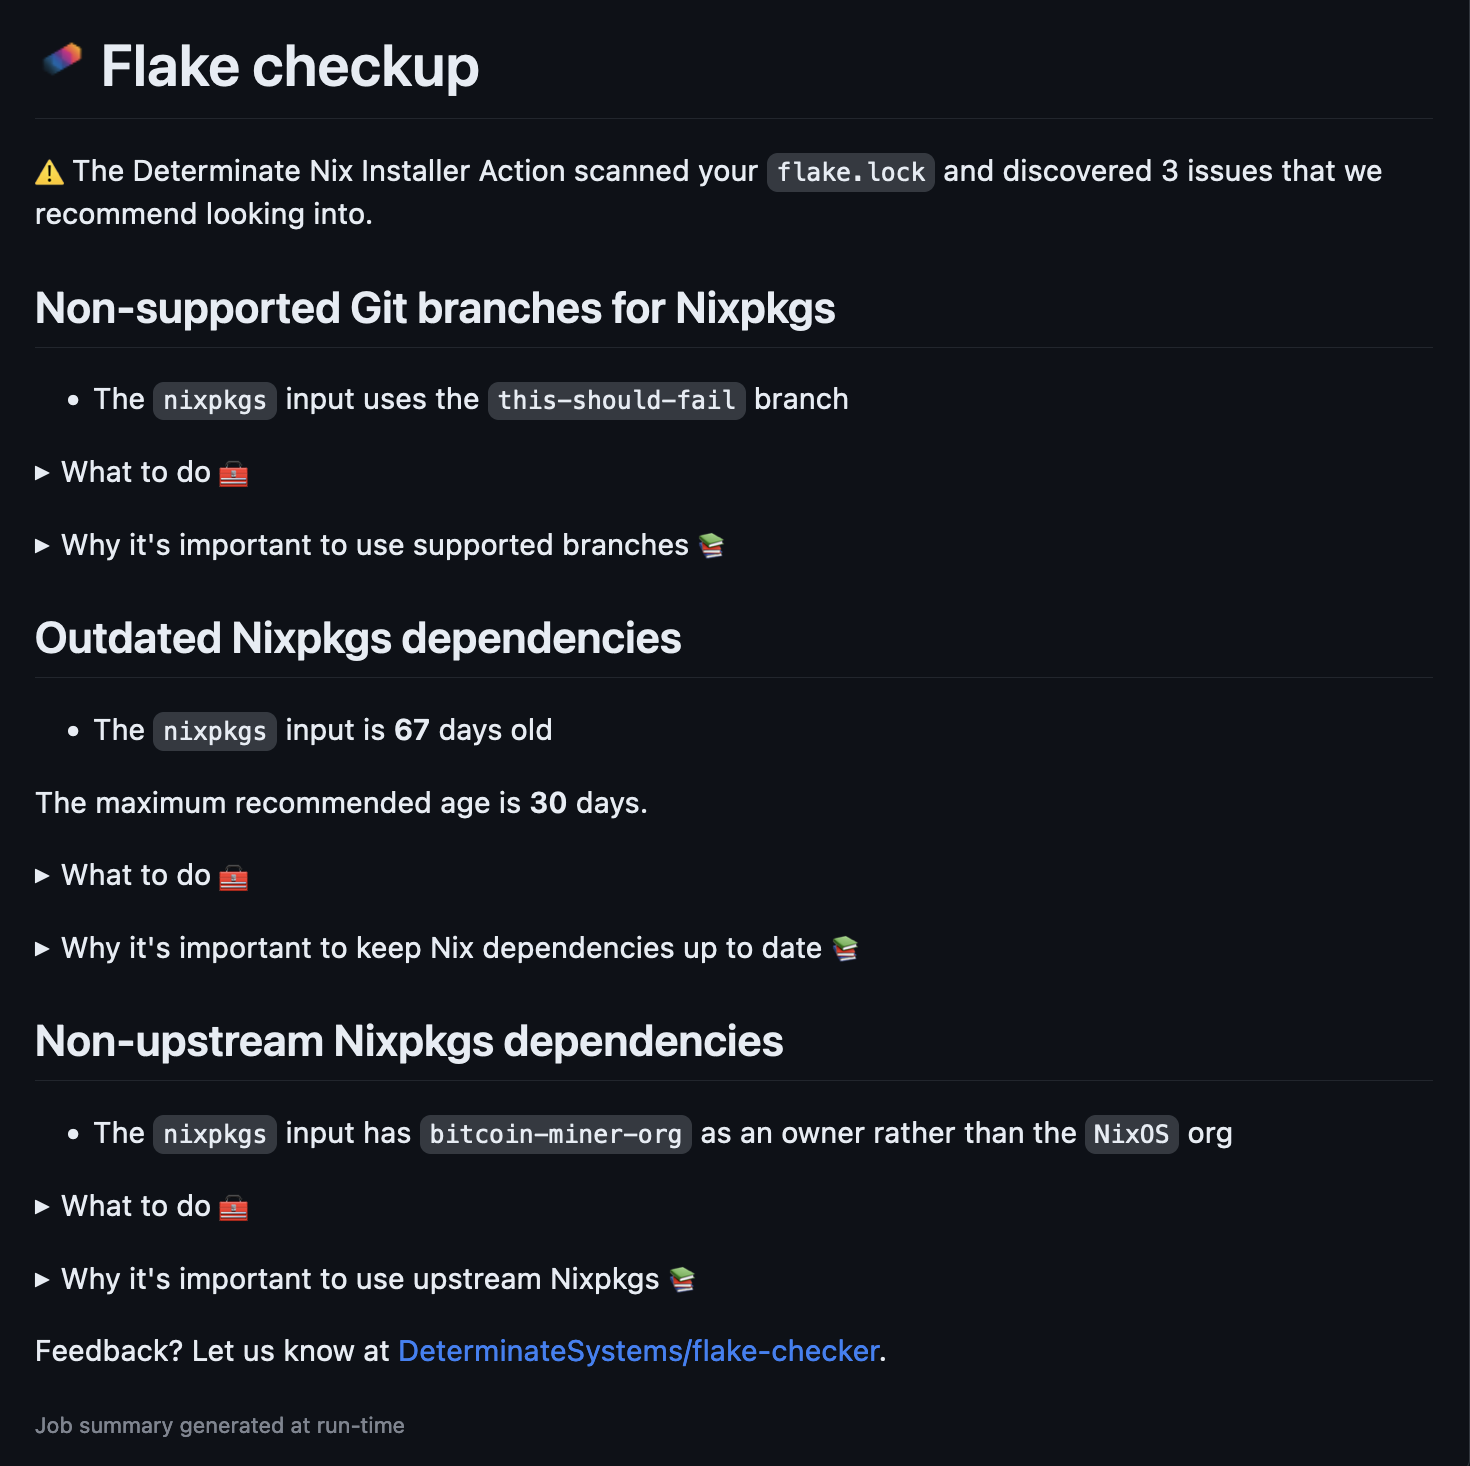 Nix Flake Checker summary with a not-so-squeaky-clean bill of health